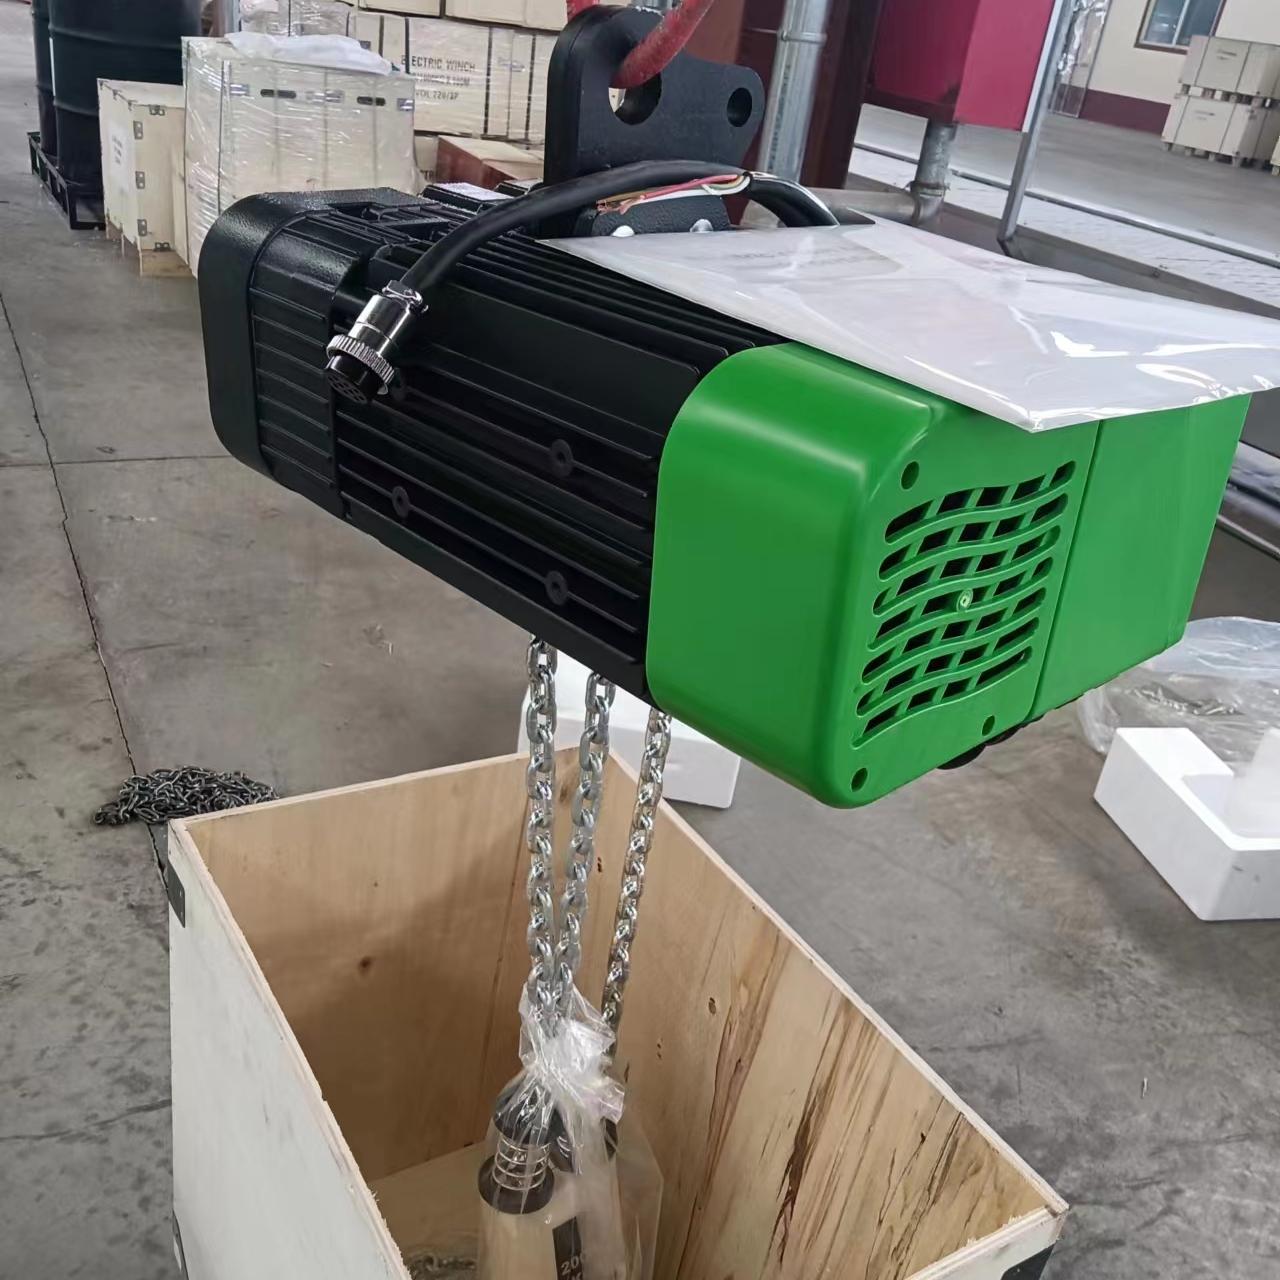 SC type electric chain hoist with trolley